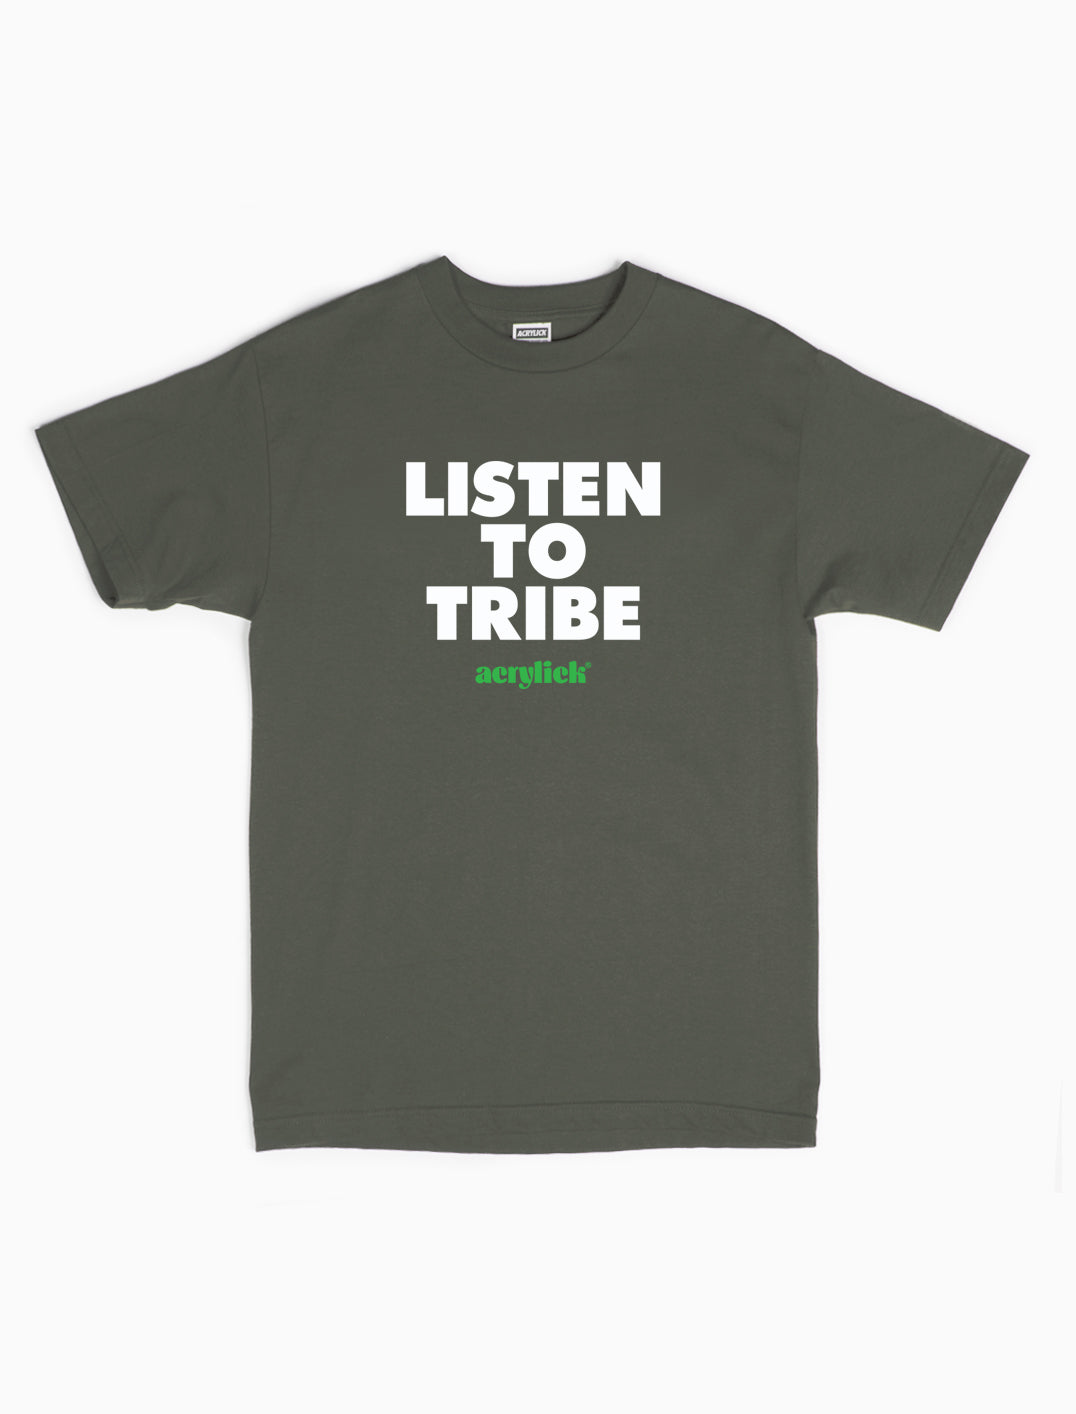 Listen to Tribe Tee